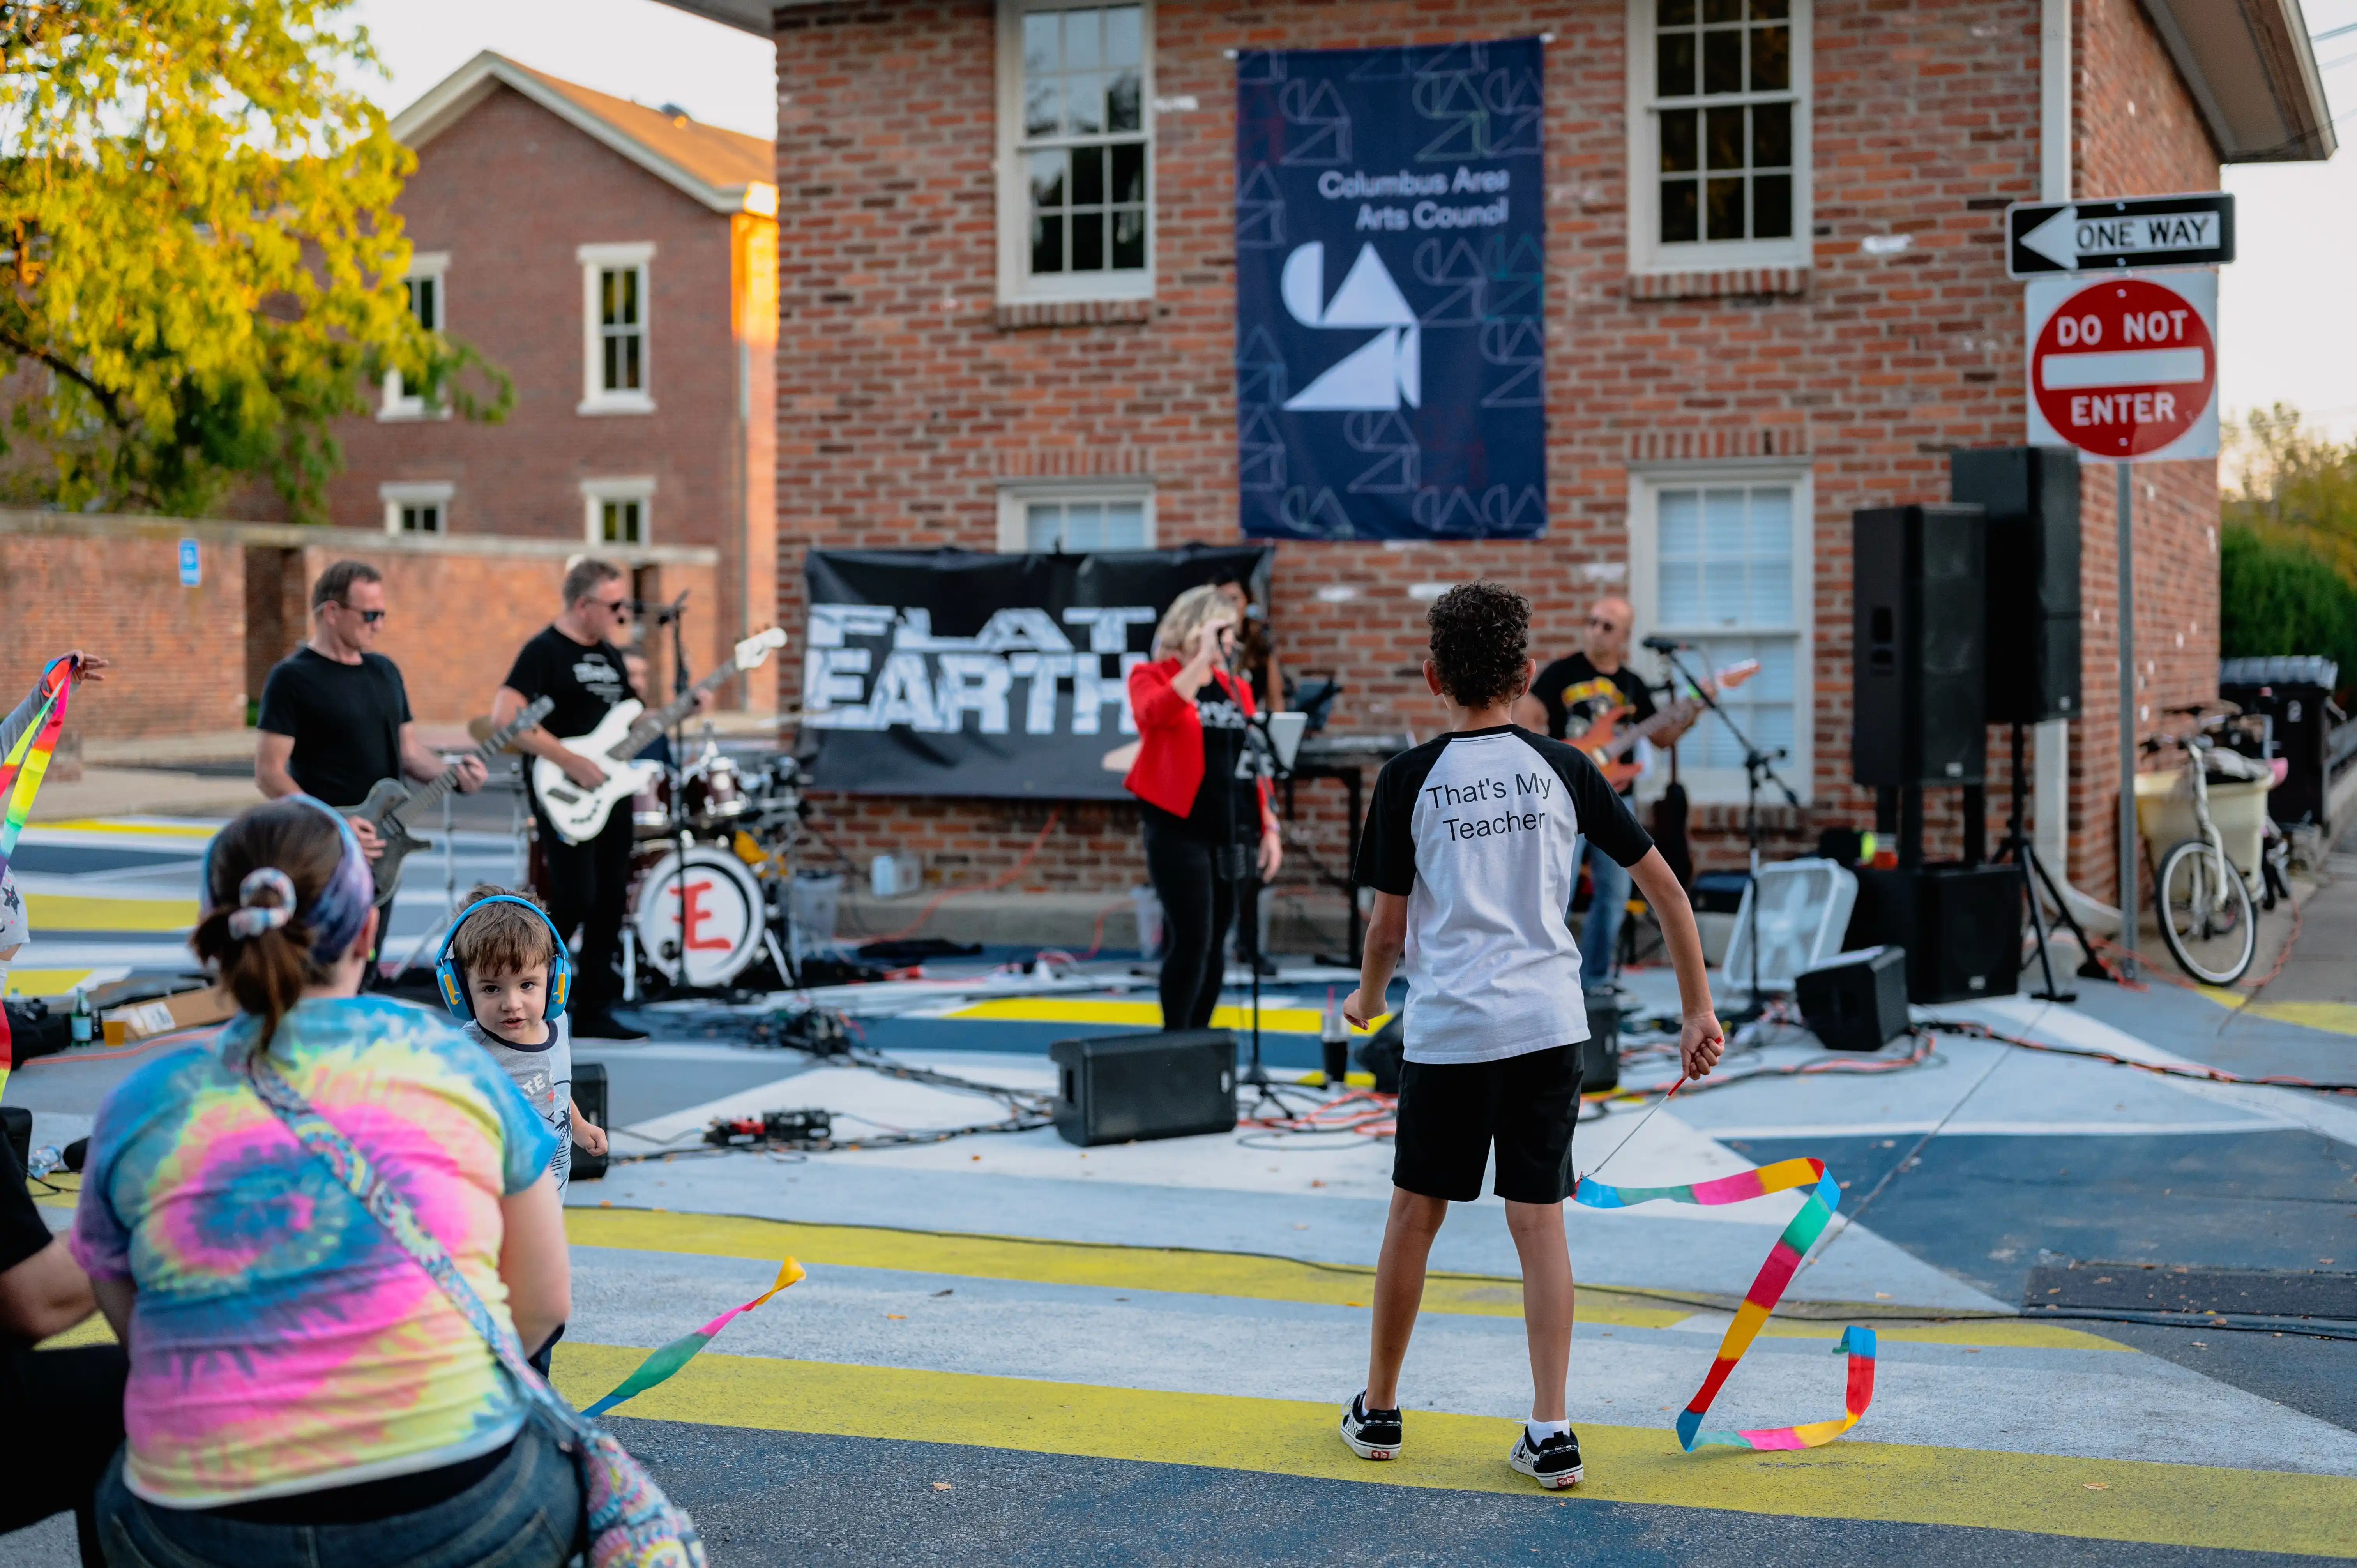 Band performing on an outdoor stage with a small audience, featuring a guitarist, vocalist, and drummer, and a person in a tie-dye shirt watching.